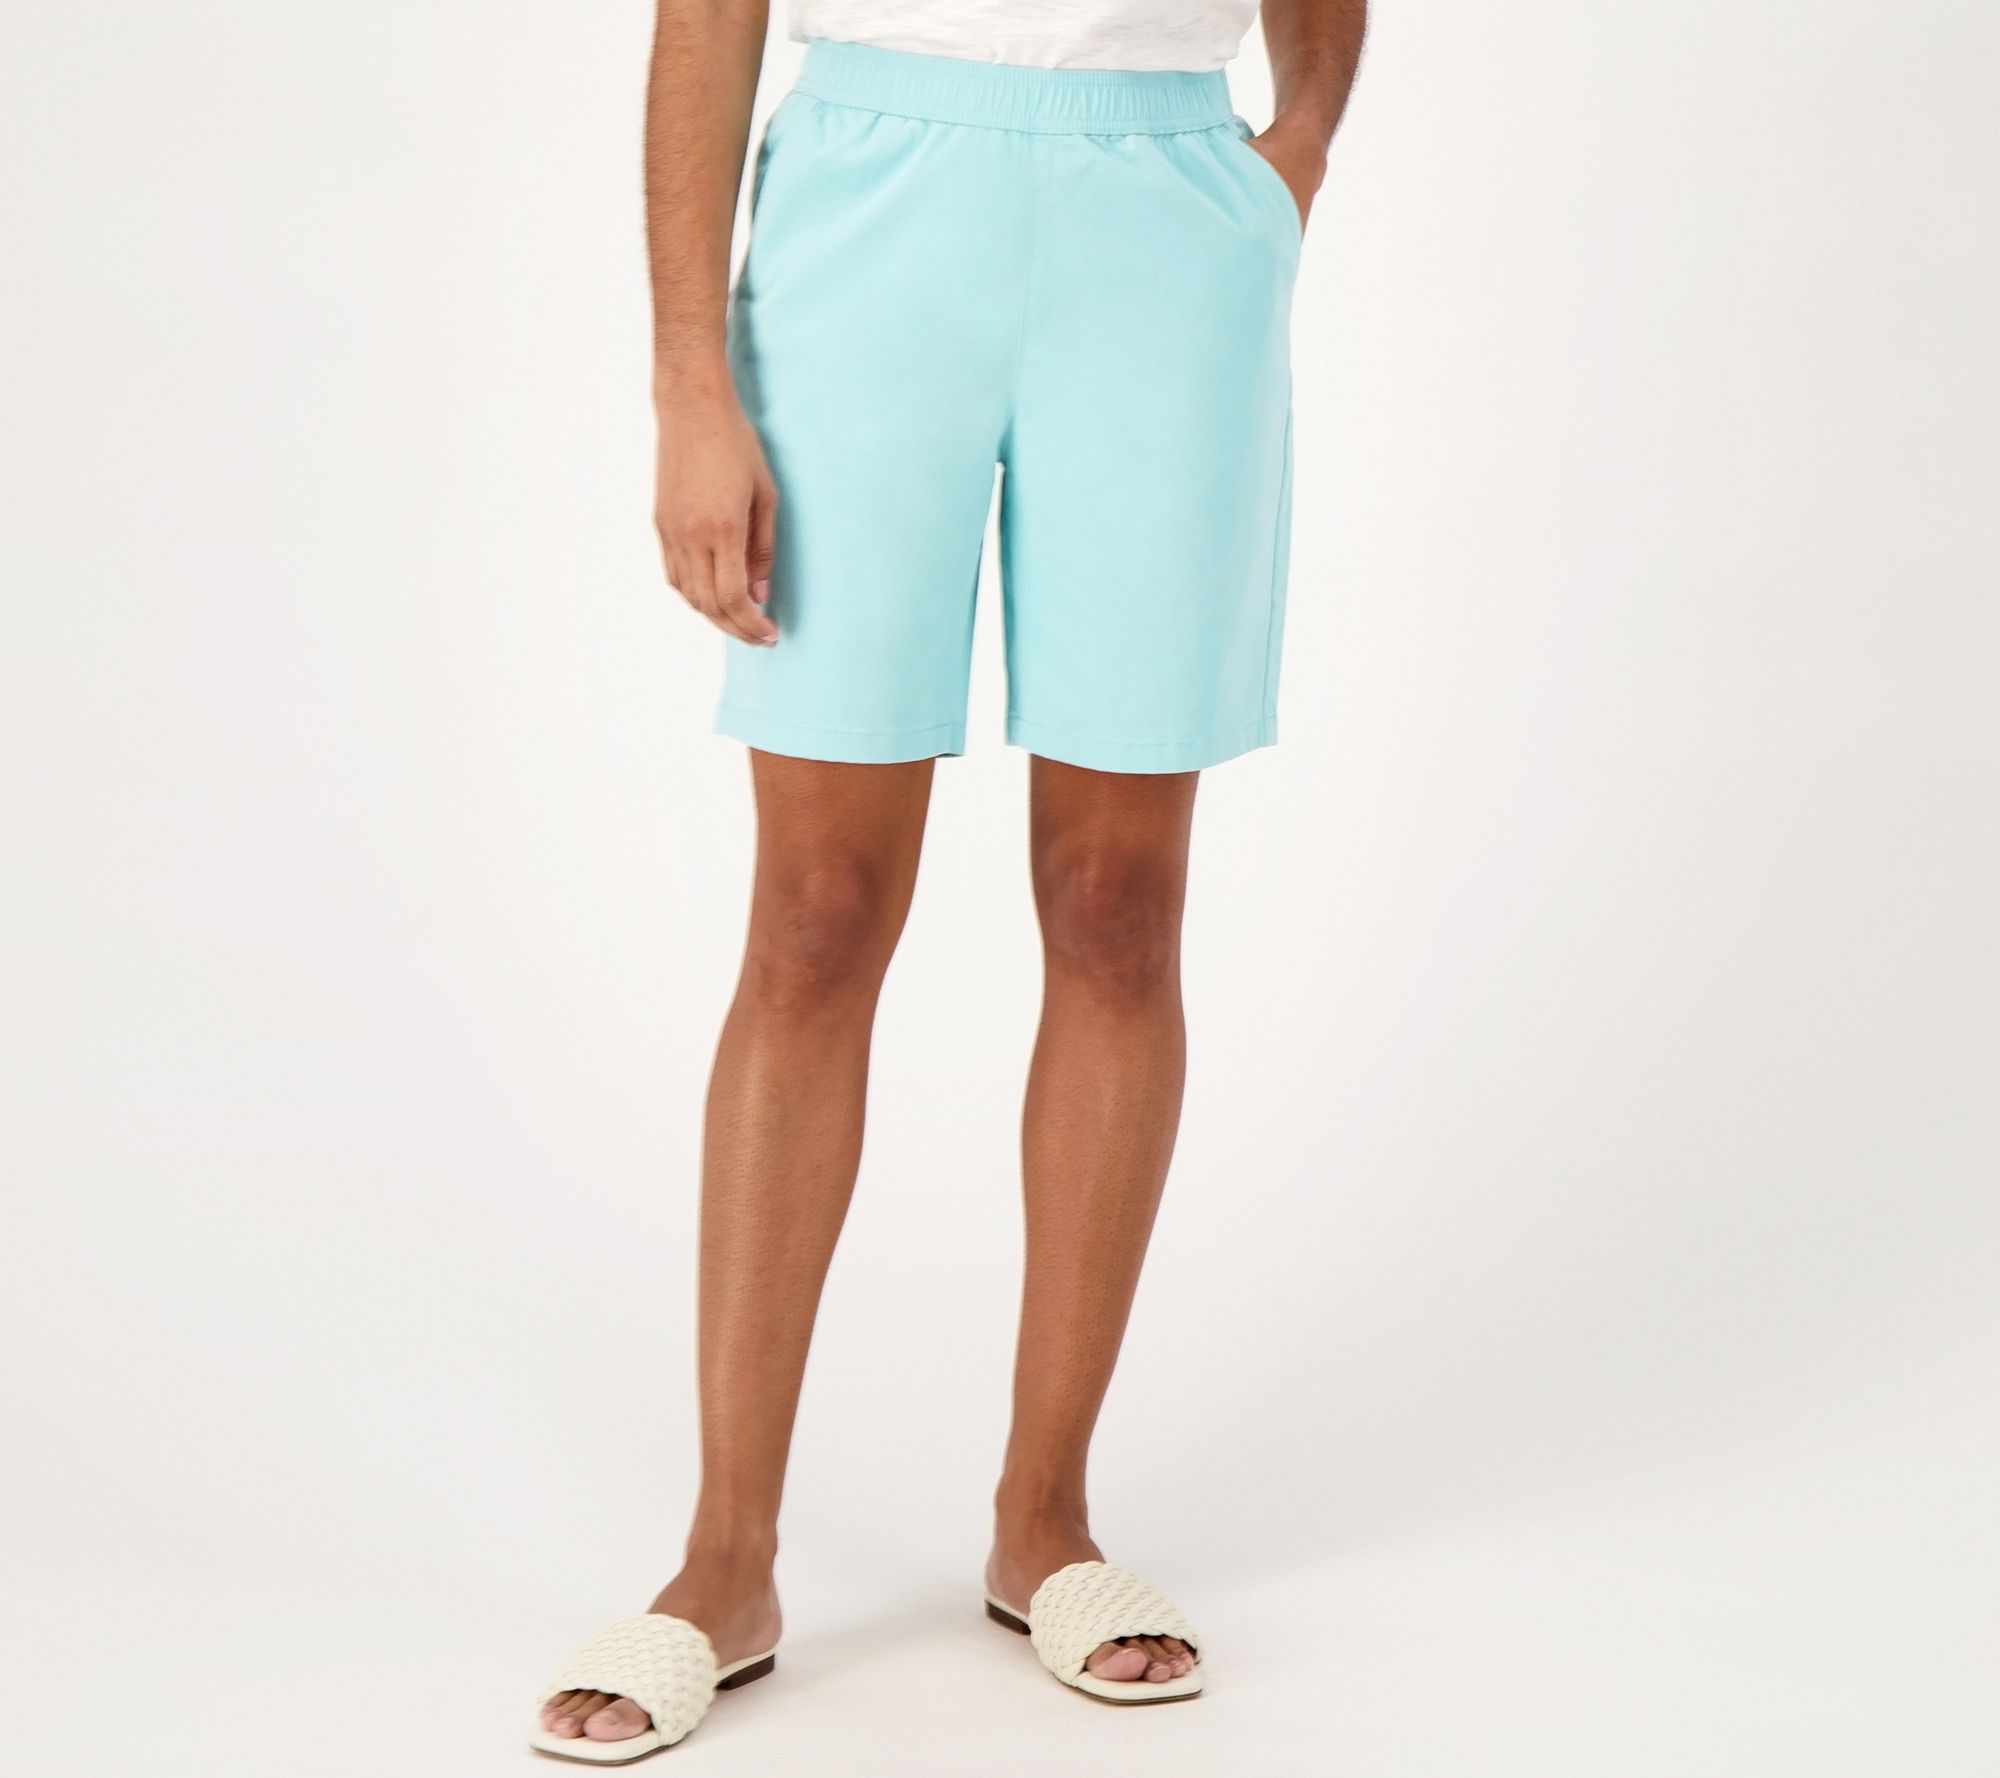 Denim & Co. EasyWear Twill Relaxed Pull-On Short - QVC.com